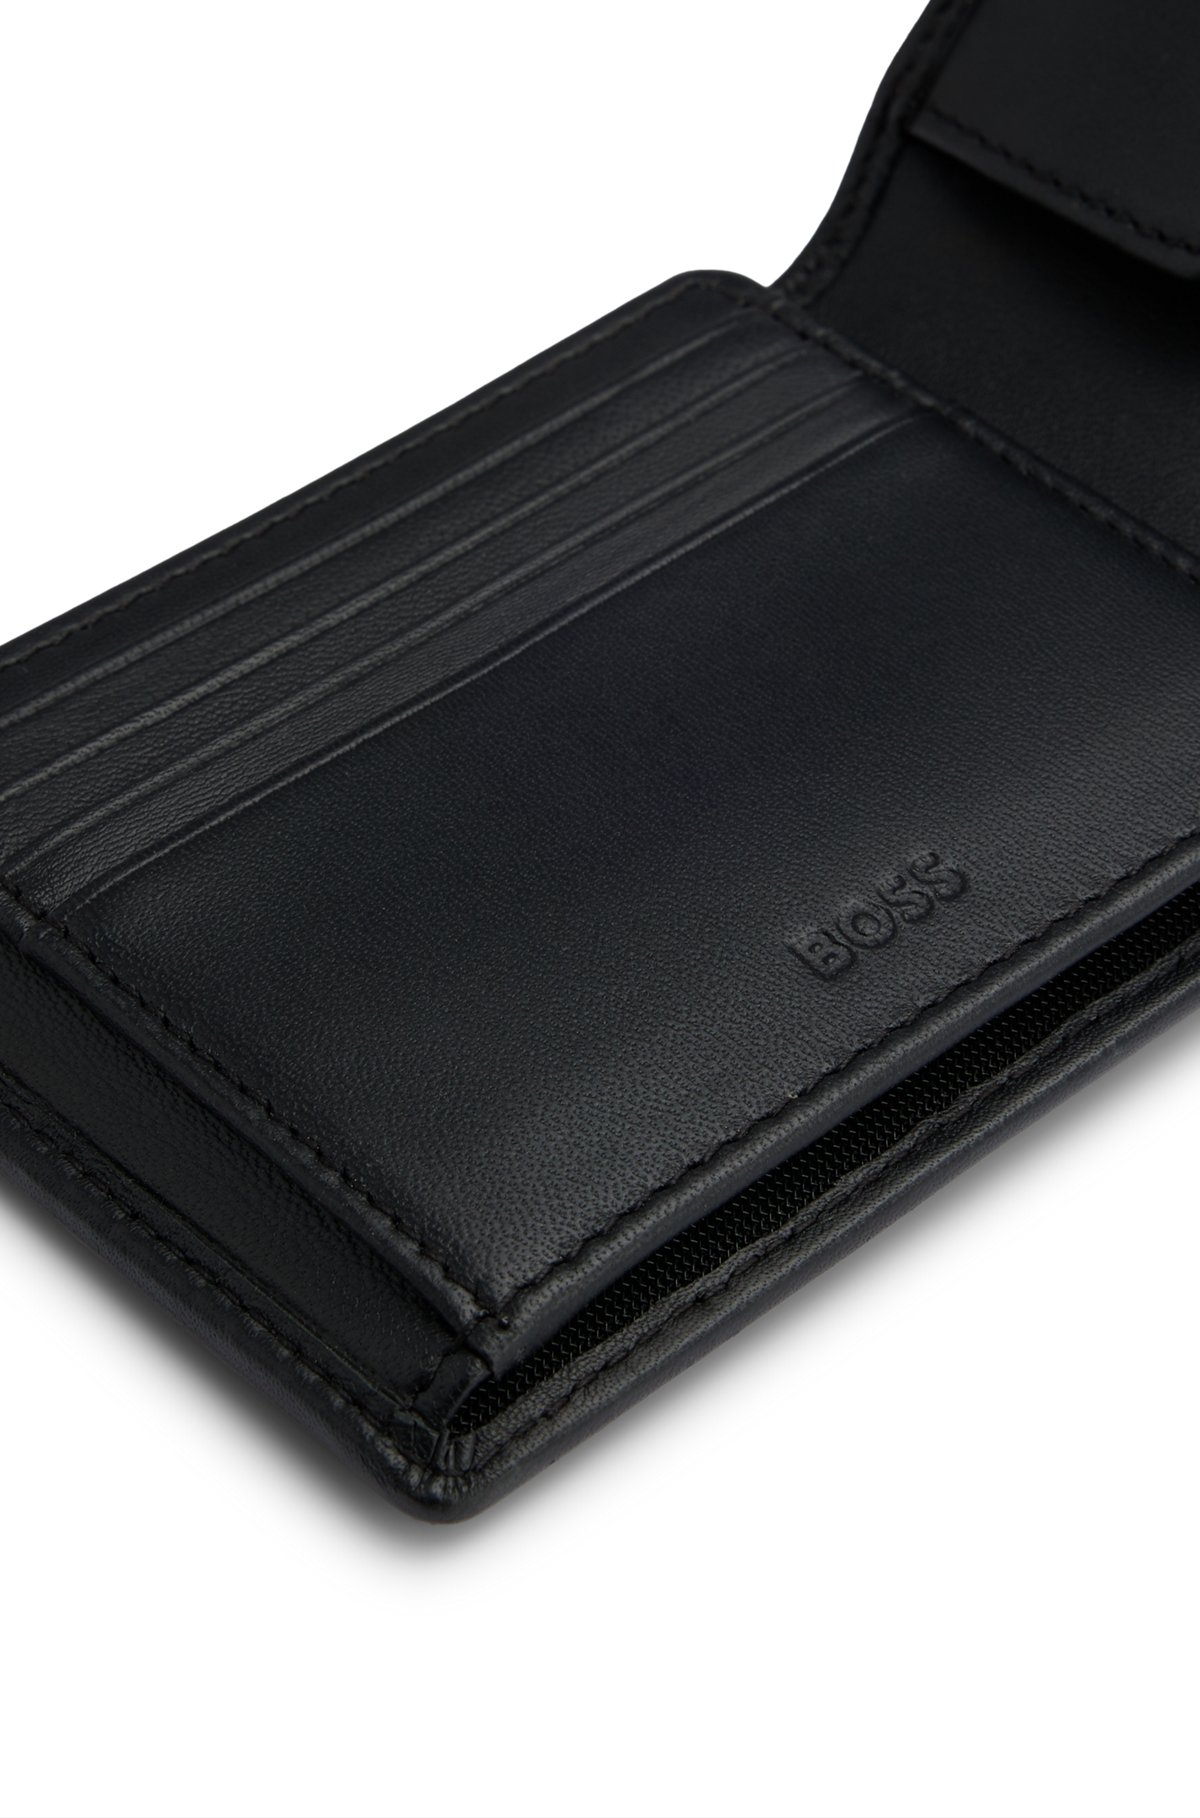 Leather trifold wallet with embossed logo and coin pocket, Black